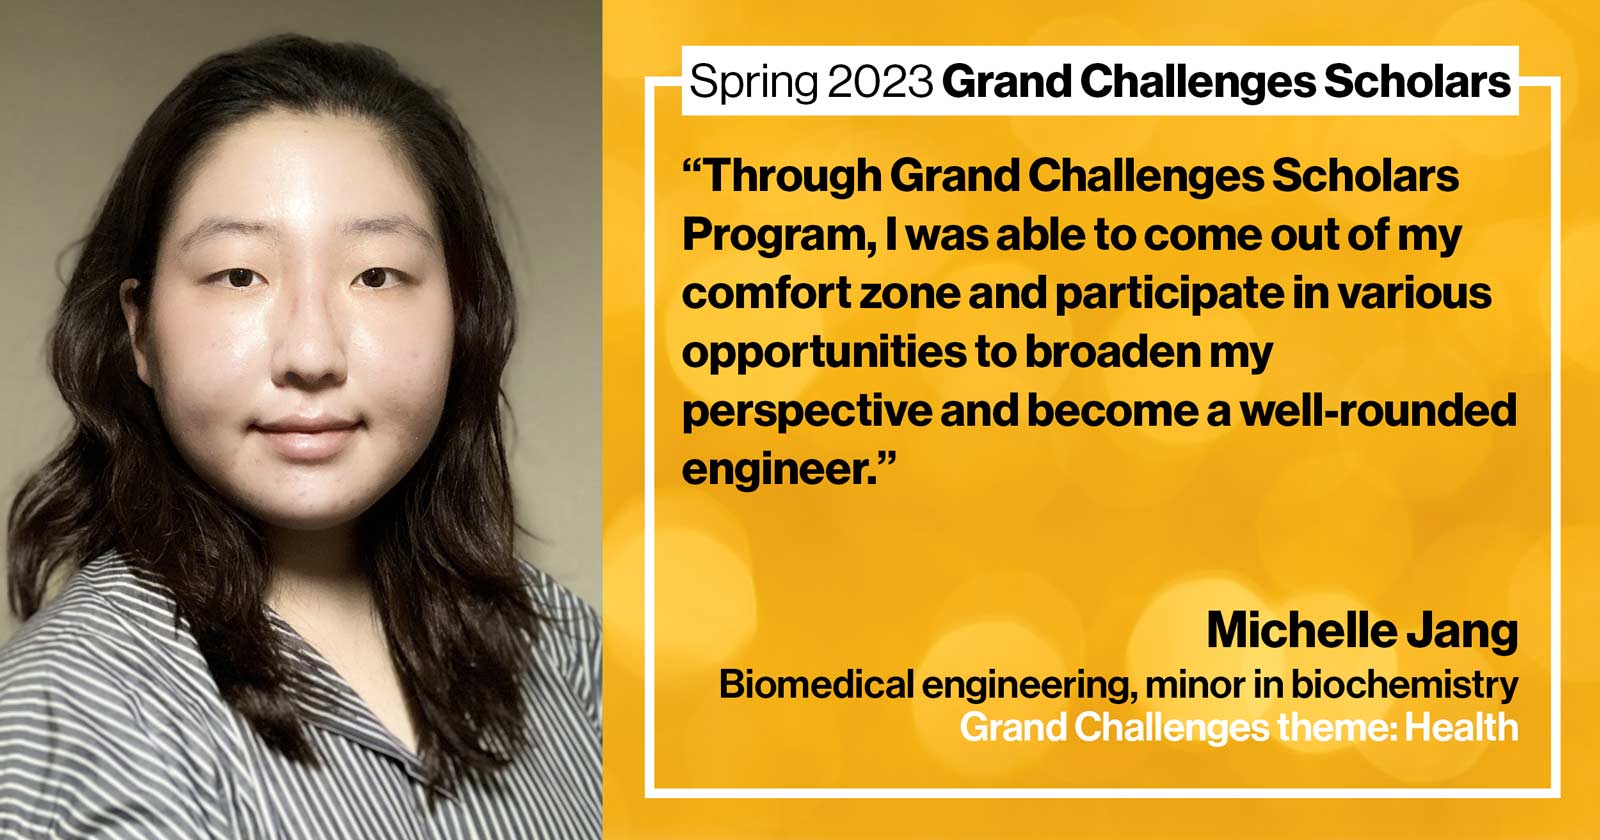 "Michelle Jang Biomedical engineering Grand Challenge: Health Quote: “Through Grand Challenges Scholars Program, I was able to come out of my comfort zone and participate in various opportunities to broaden my perspective and become a well-rounded engineer.”"